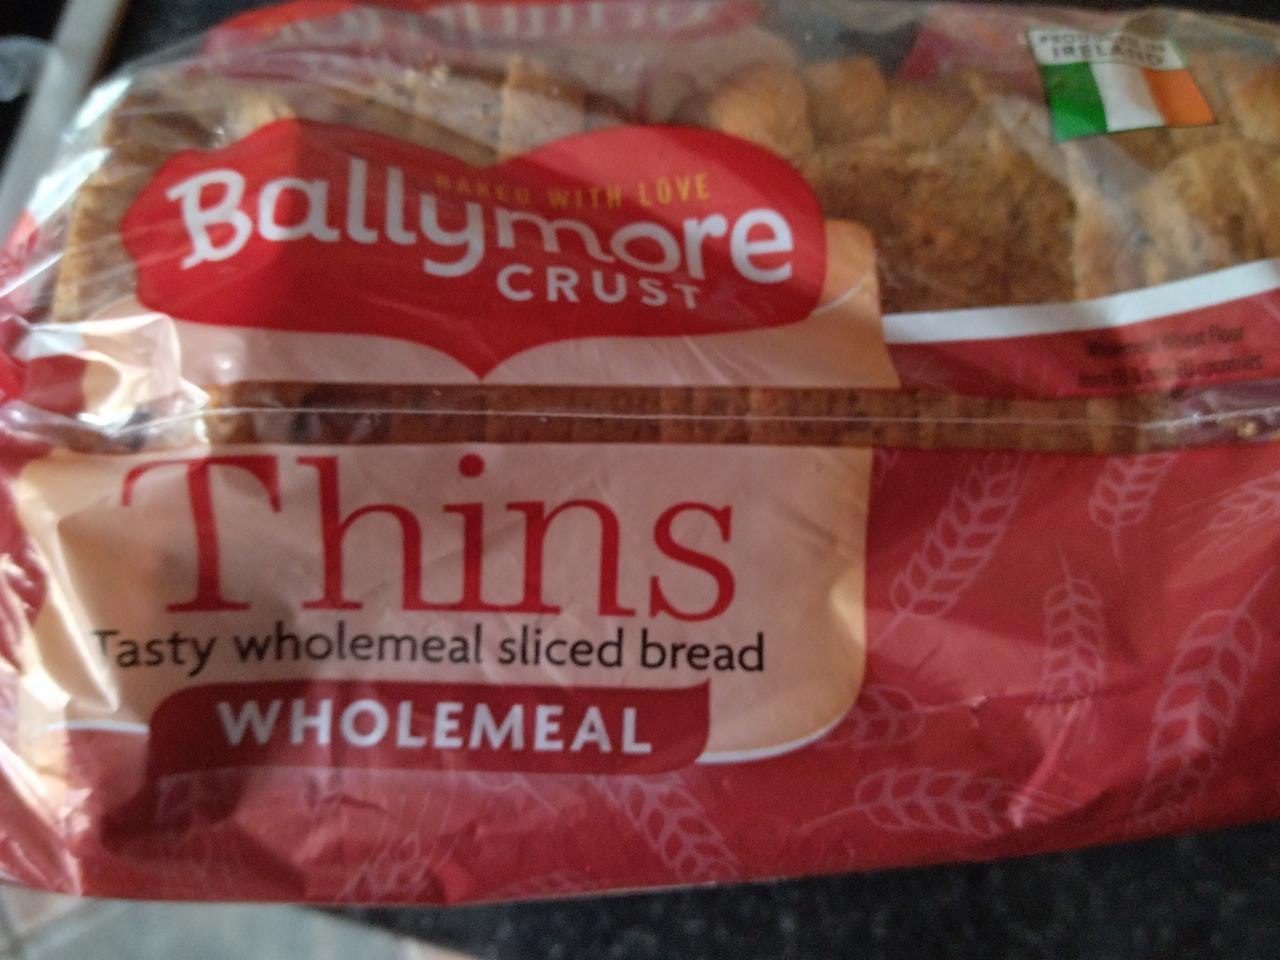 Fotografie - Thins Tasty Wholemeal sliced bread Ballymore Crust